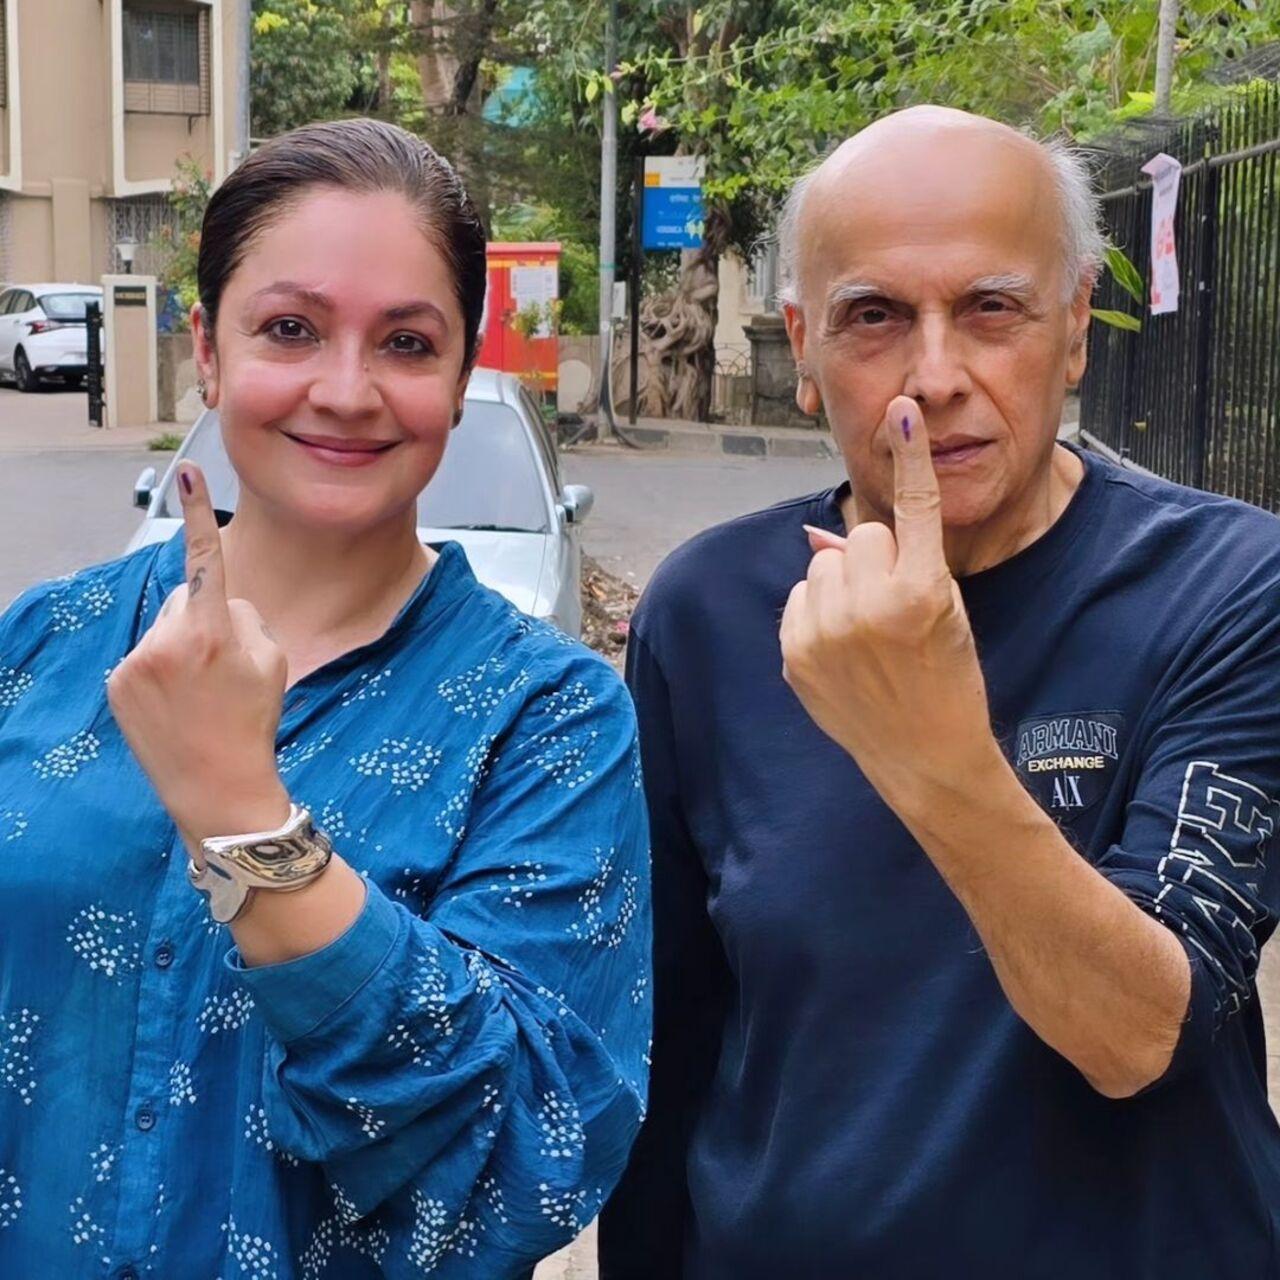 Pooja Bhatt took to Instagram to share a picture of herself and her father Mahesh Bhatt flaunting their inked finger